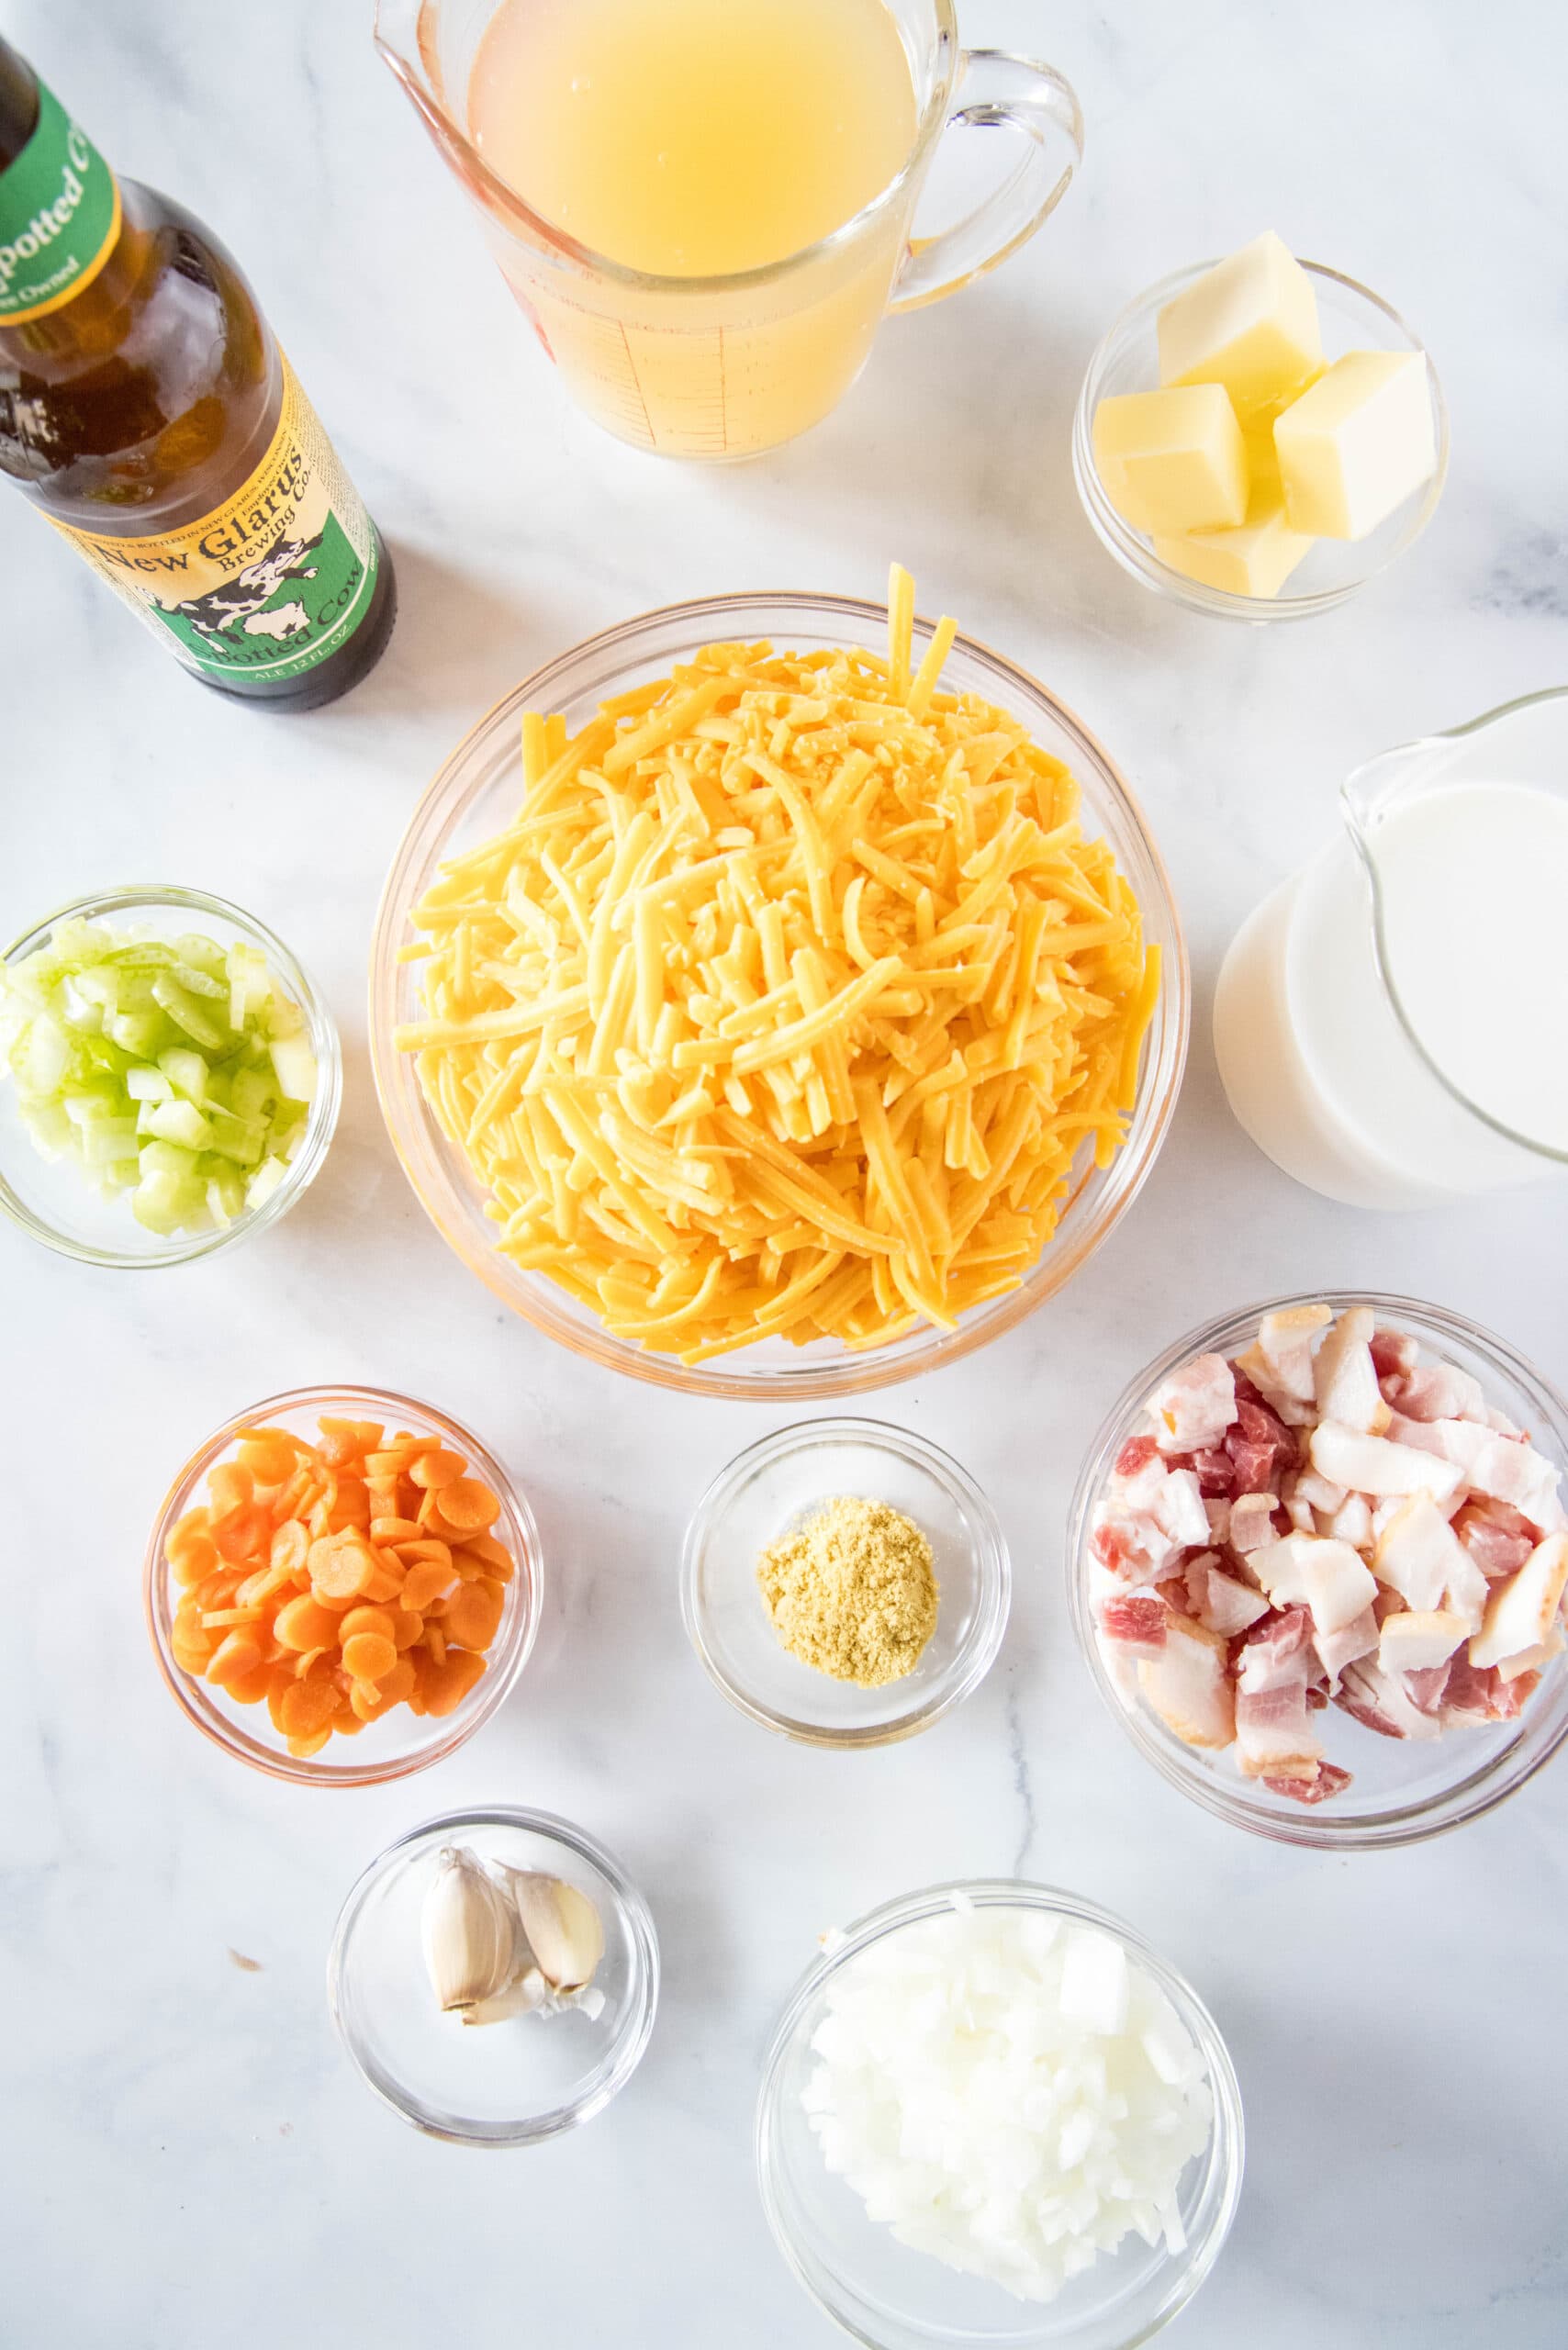 Overhead view of the ingredients needed for beer cheese soup: a bottle of beer, a bowl of butter, a bowl of grated cheddar cheese, a pitcher of milk, a bowl of diced celery, a bowl of diced carrots, a bowl of dried mustard, a bowl of diced onions, a bowl of garlic cloves, and a bowl of chopped bacon